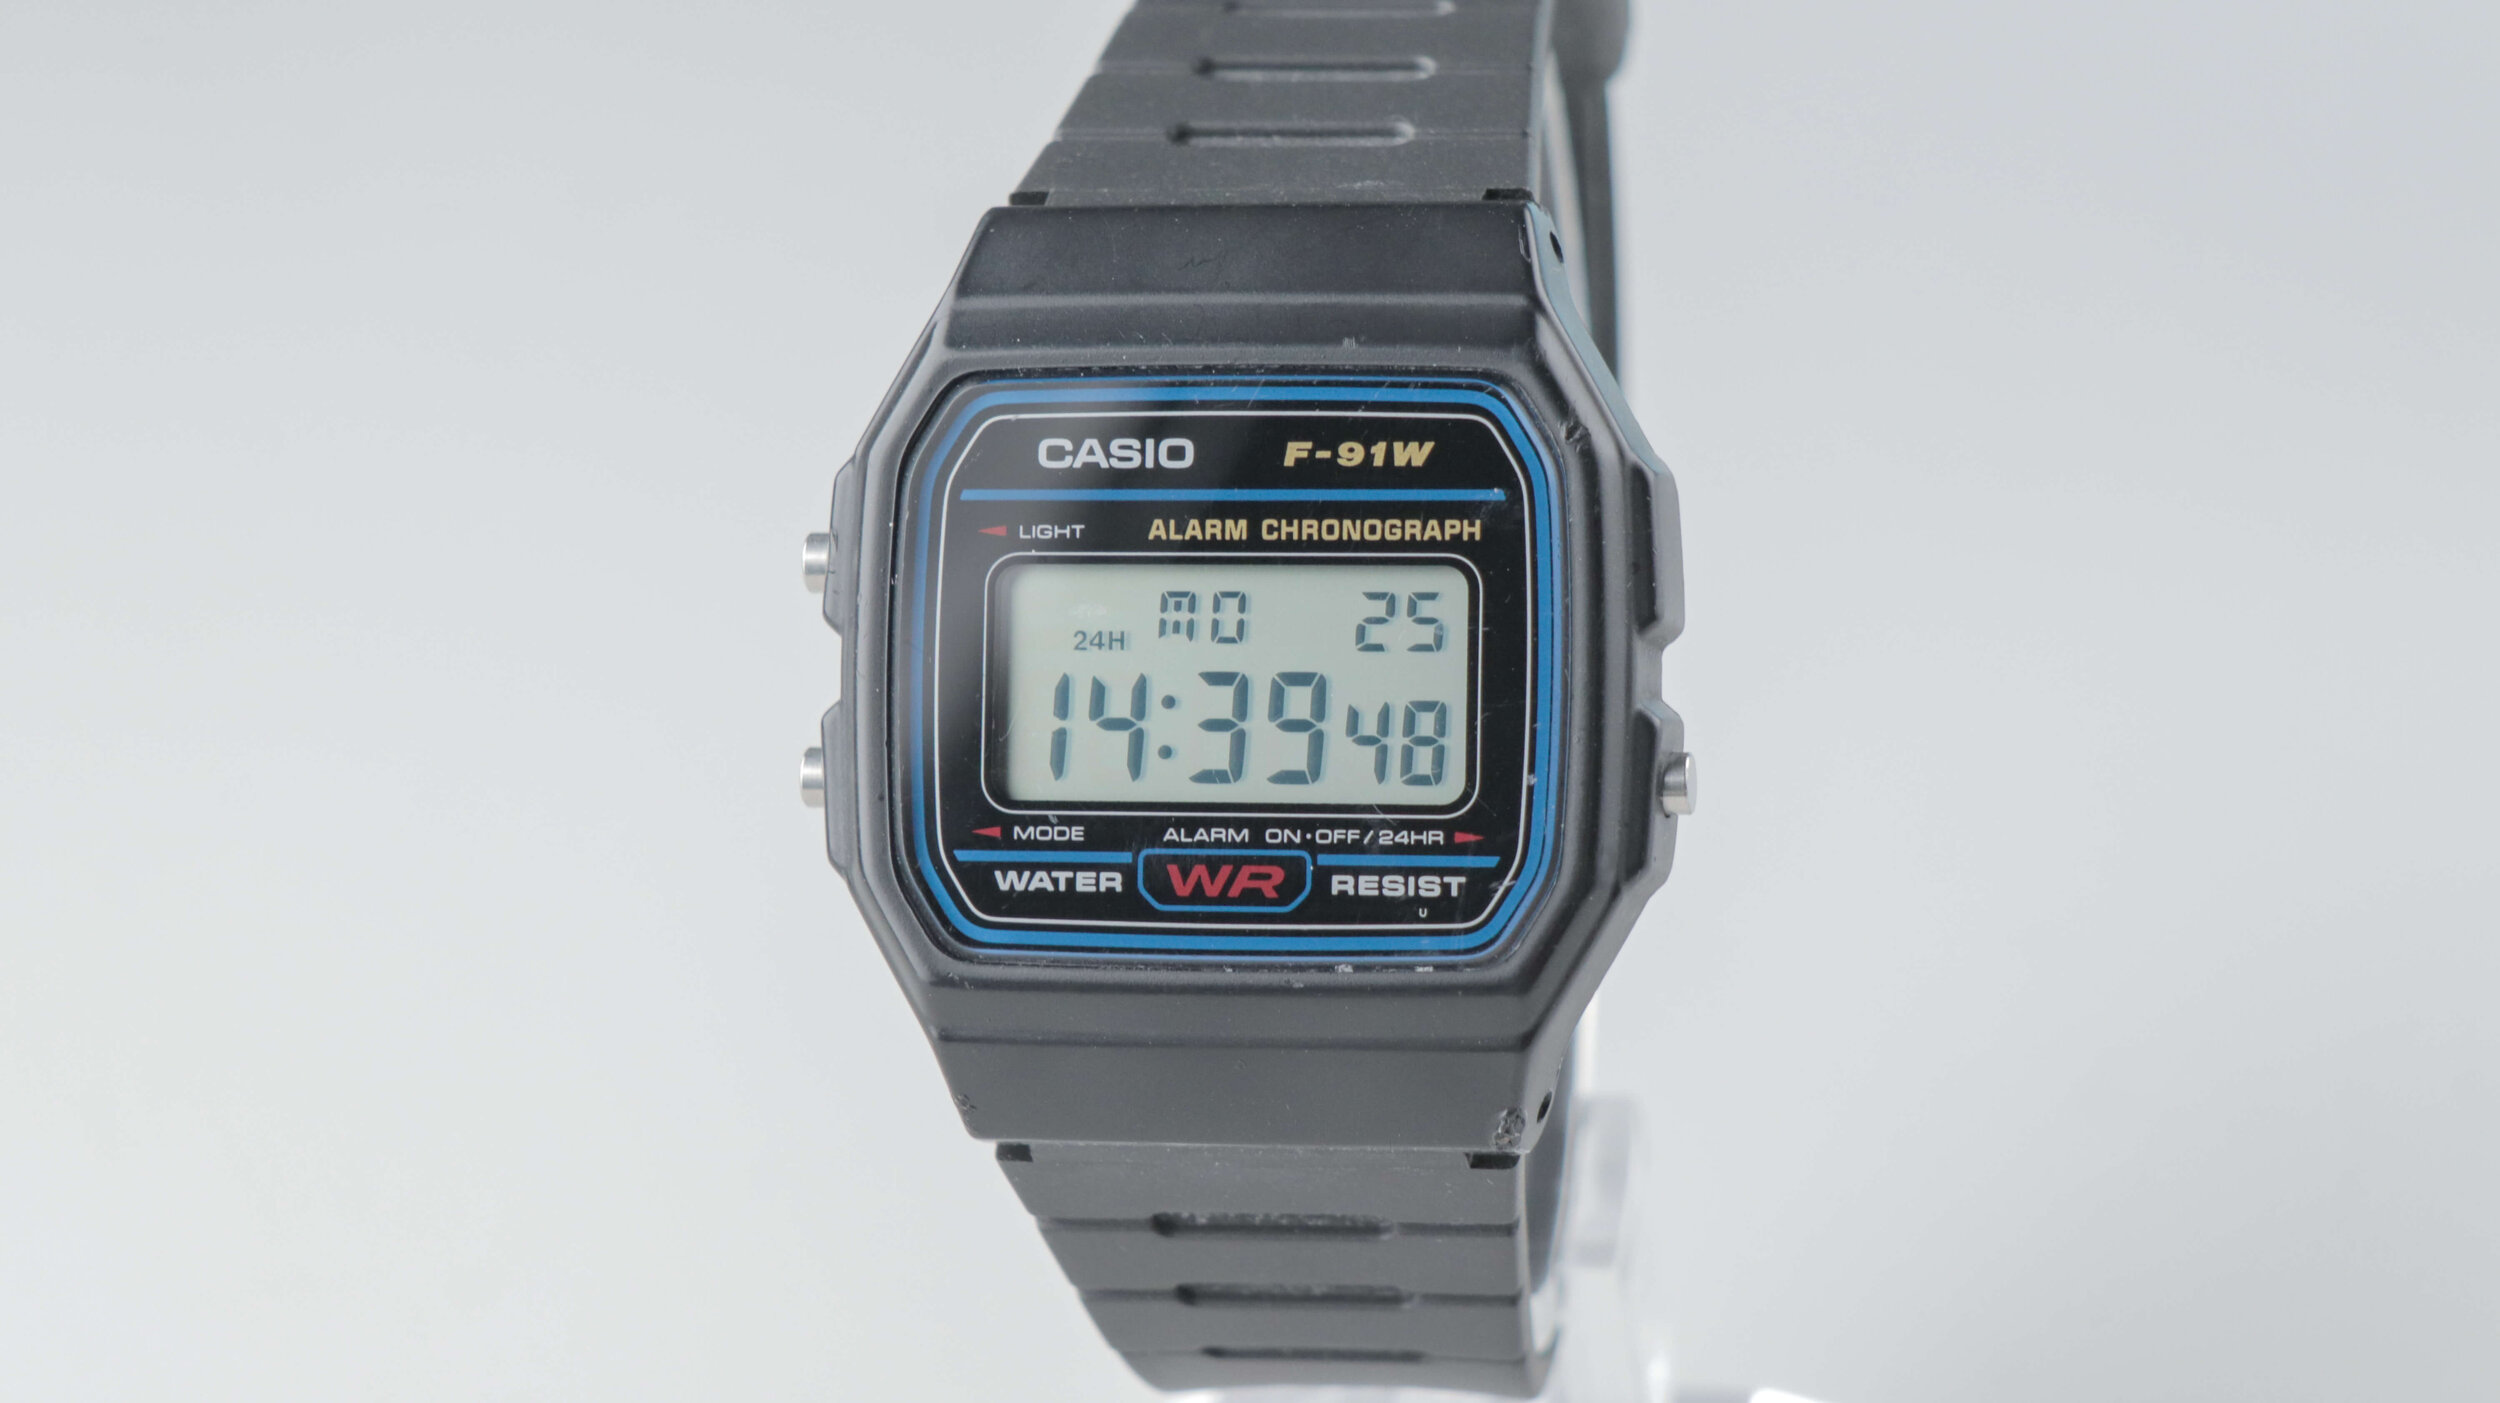 Top 20 Casio Watches Of All Time – The Ultimate List Affordable Casio Watches — Ben's Watch Club